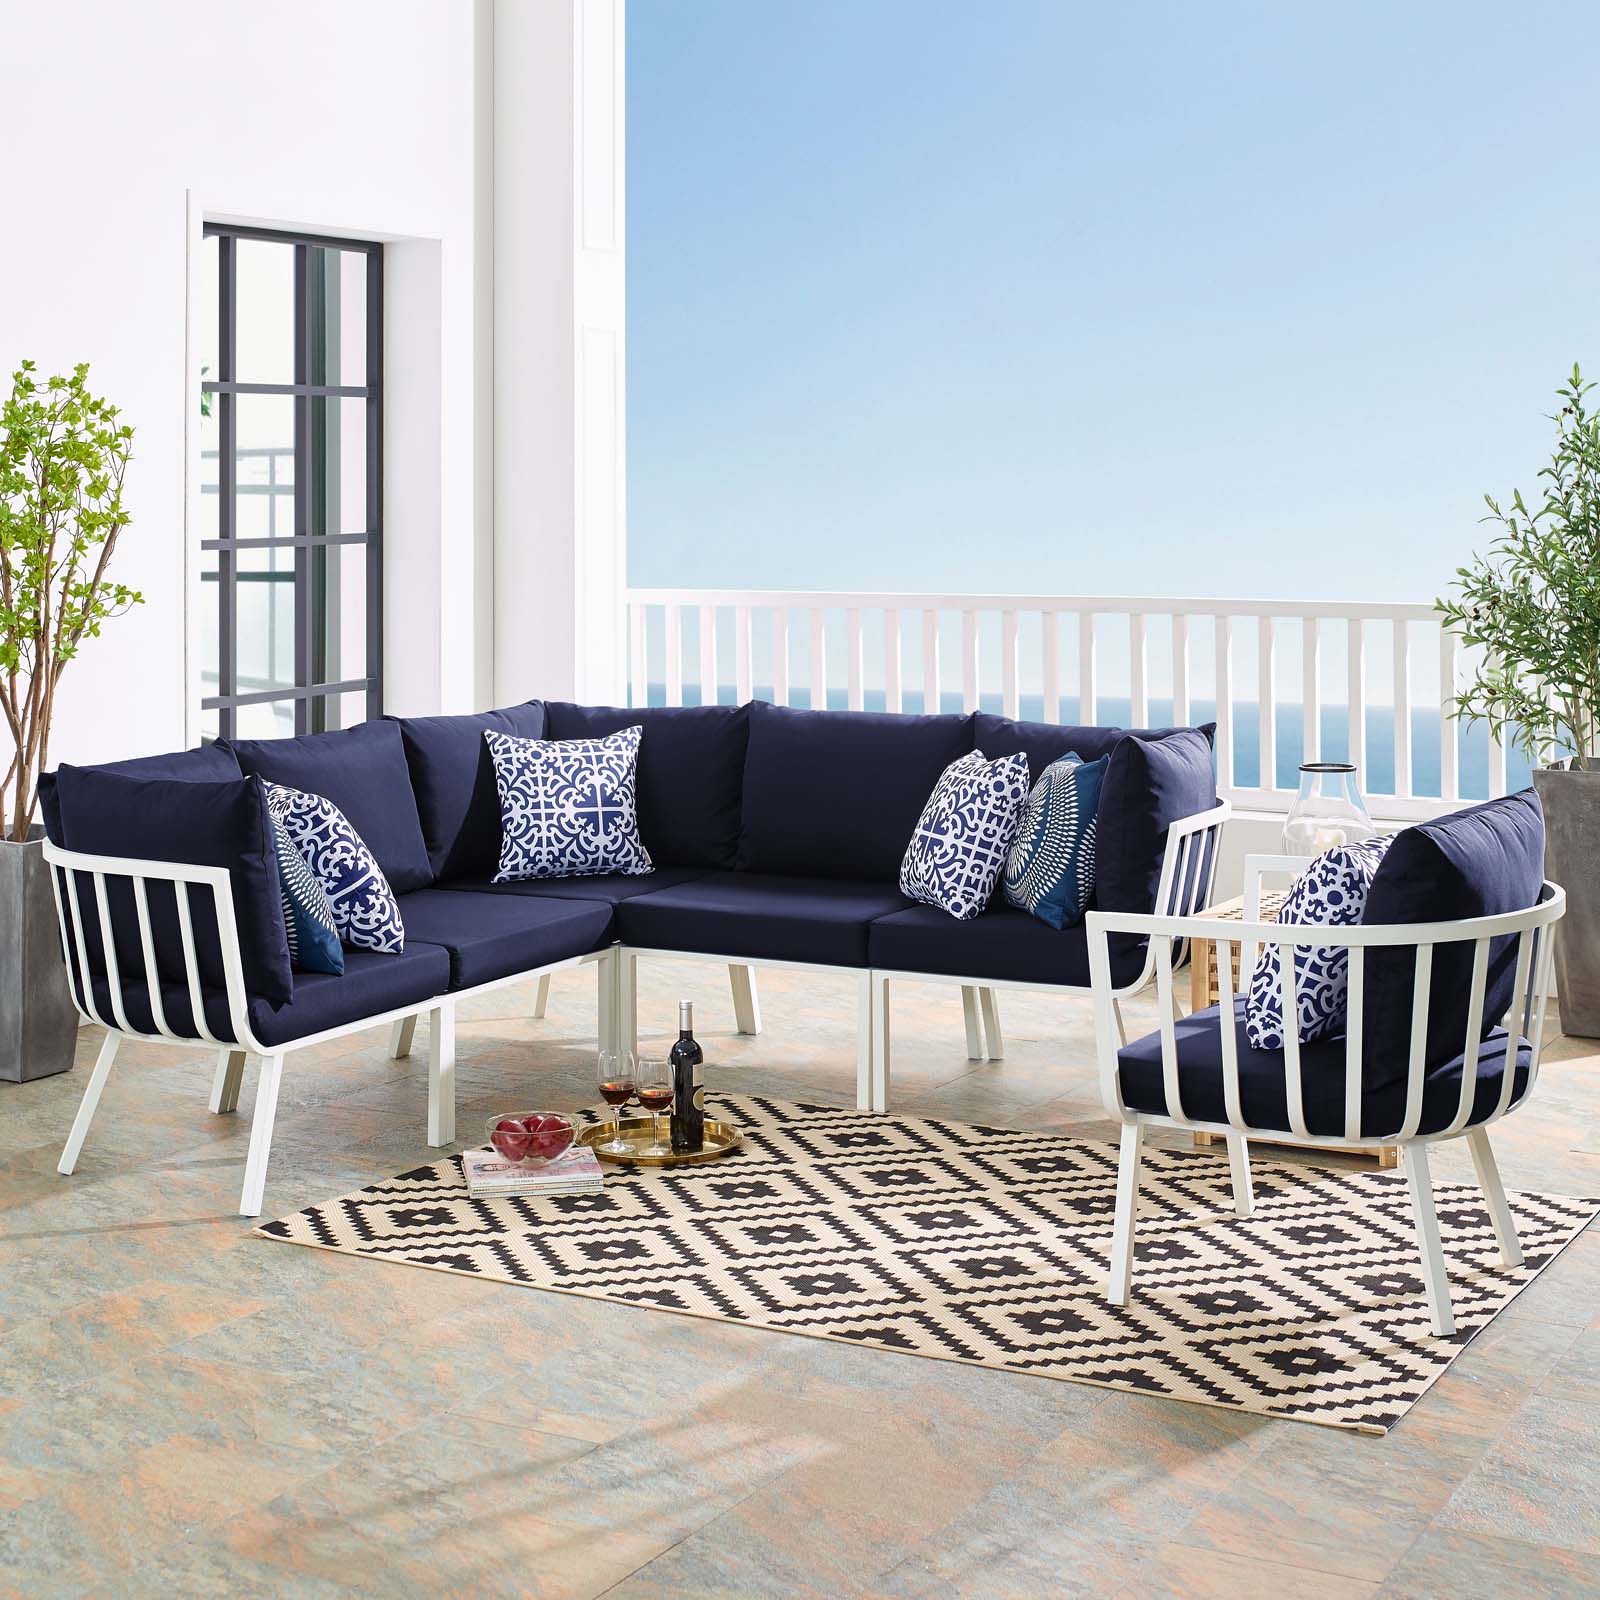 Modway Riverside 6 Piece Outdoor Patio Aluminum Set in White Navy - image 1 of 10